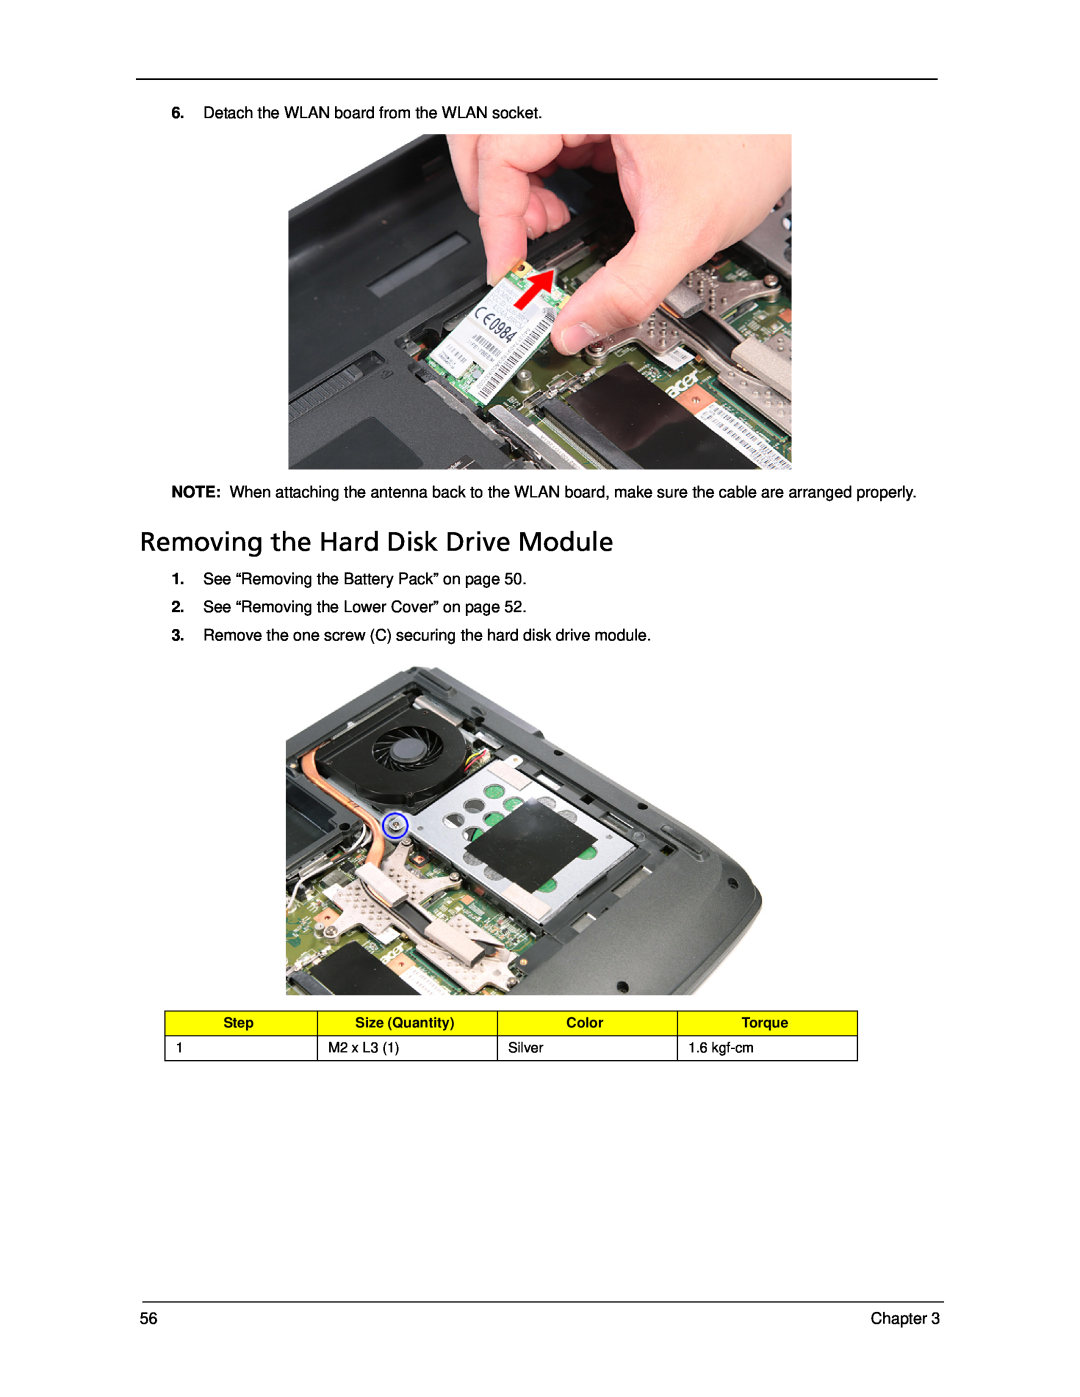 Acer 5330 manual Removing the Hard Disk Drive Module, Step, Size Quantity, Color, Torque 